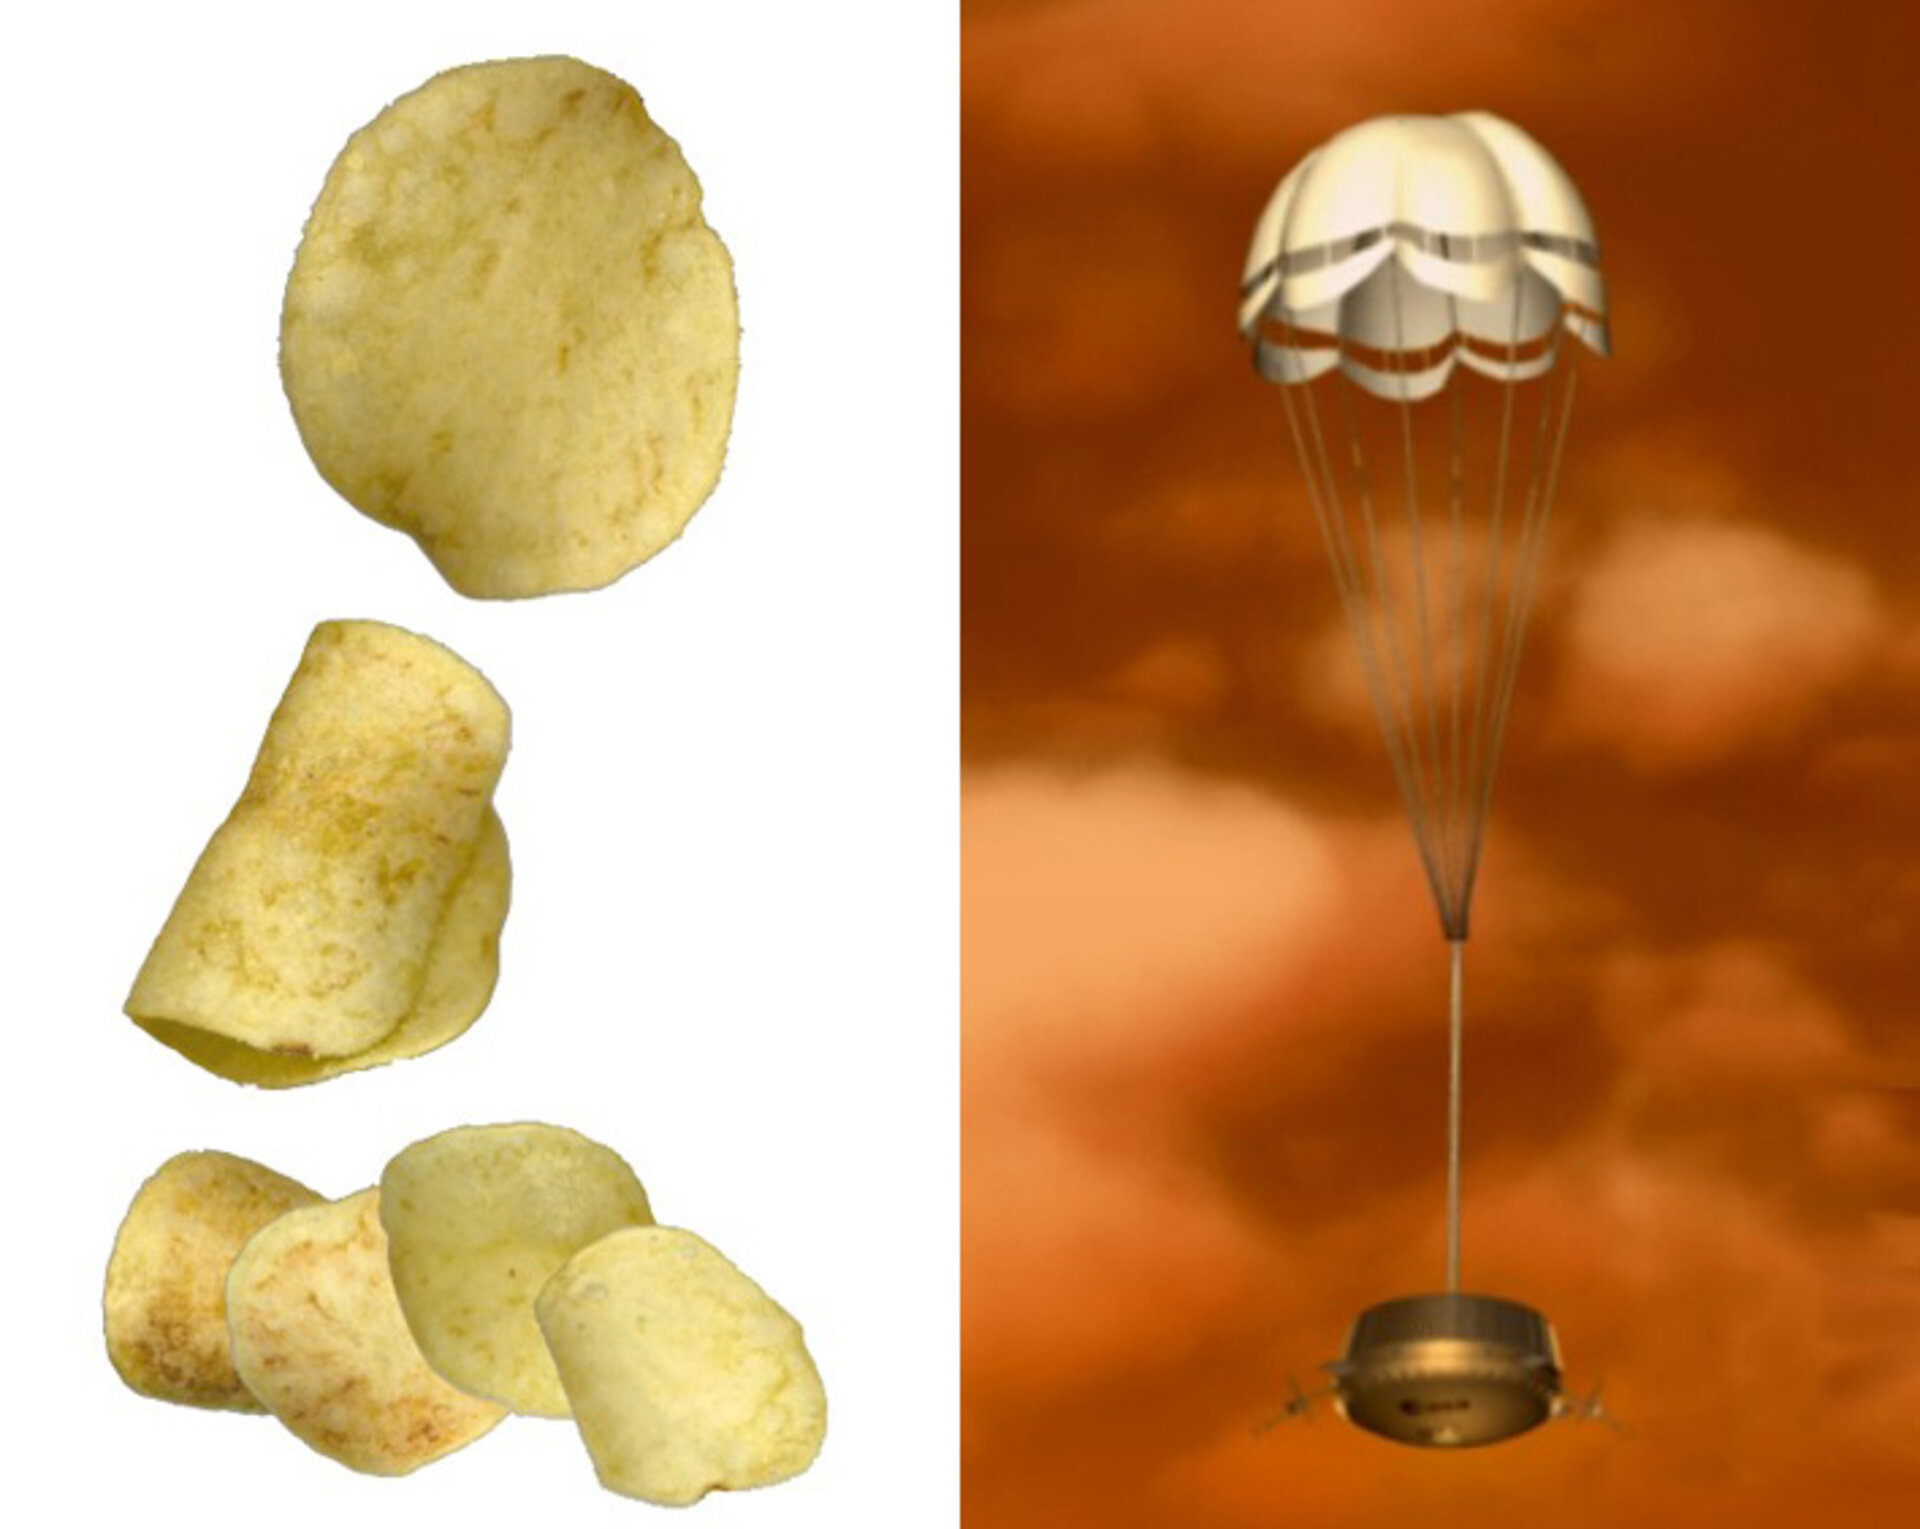 Landing a spacecraft is as challenging as dropping a potato crisp into a bag without breaking it